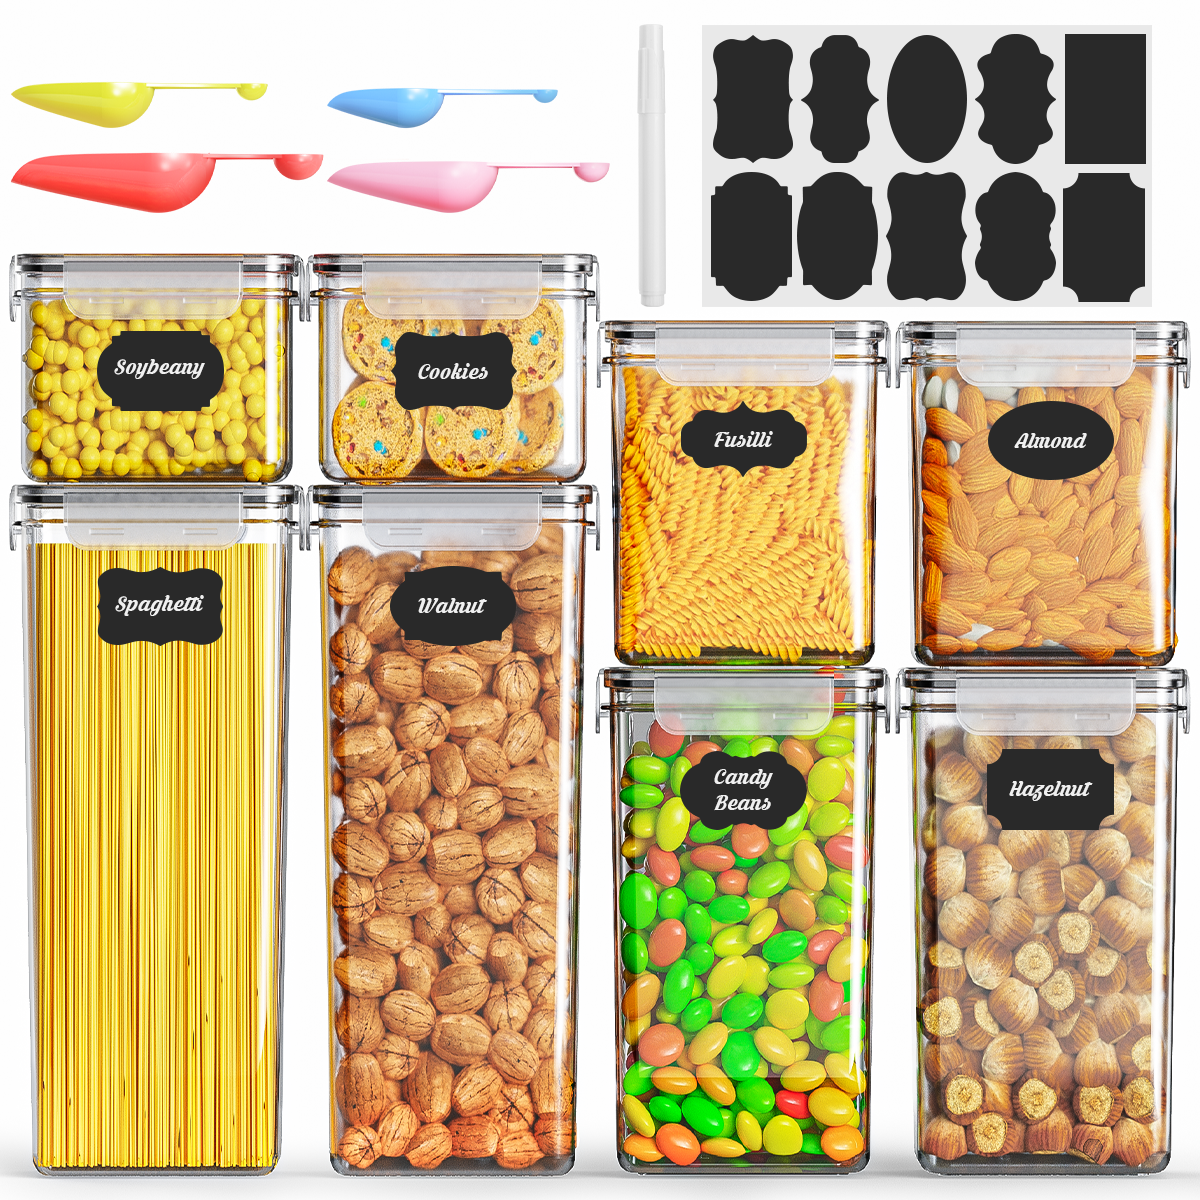 GPED Airtight Food Storage Containers with Lids, 8 PCS Plastic Kitchen and Pantry Organization Canisters for Cereal, Dry Food, Flour and Sugar, BPA Free, Free Spoon Set, Labels & Marker - image 1 of 7